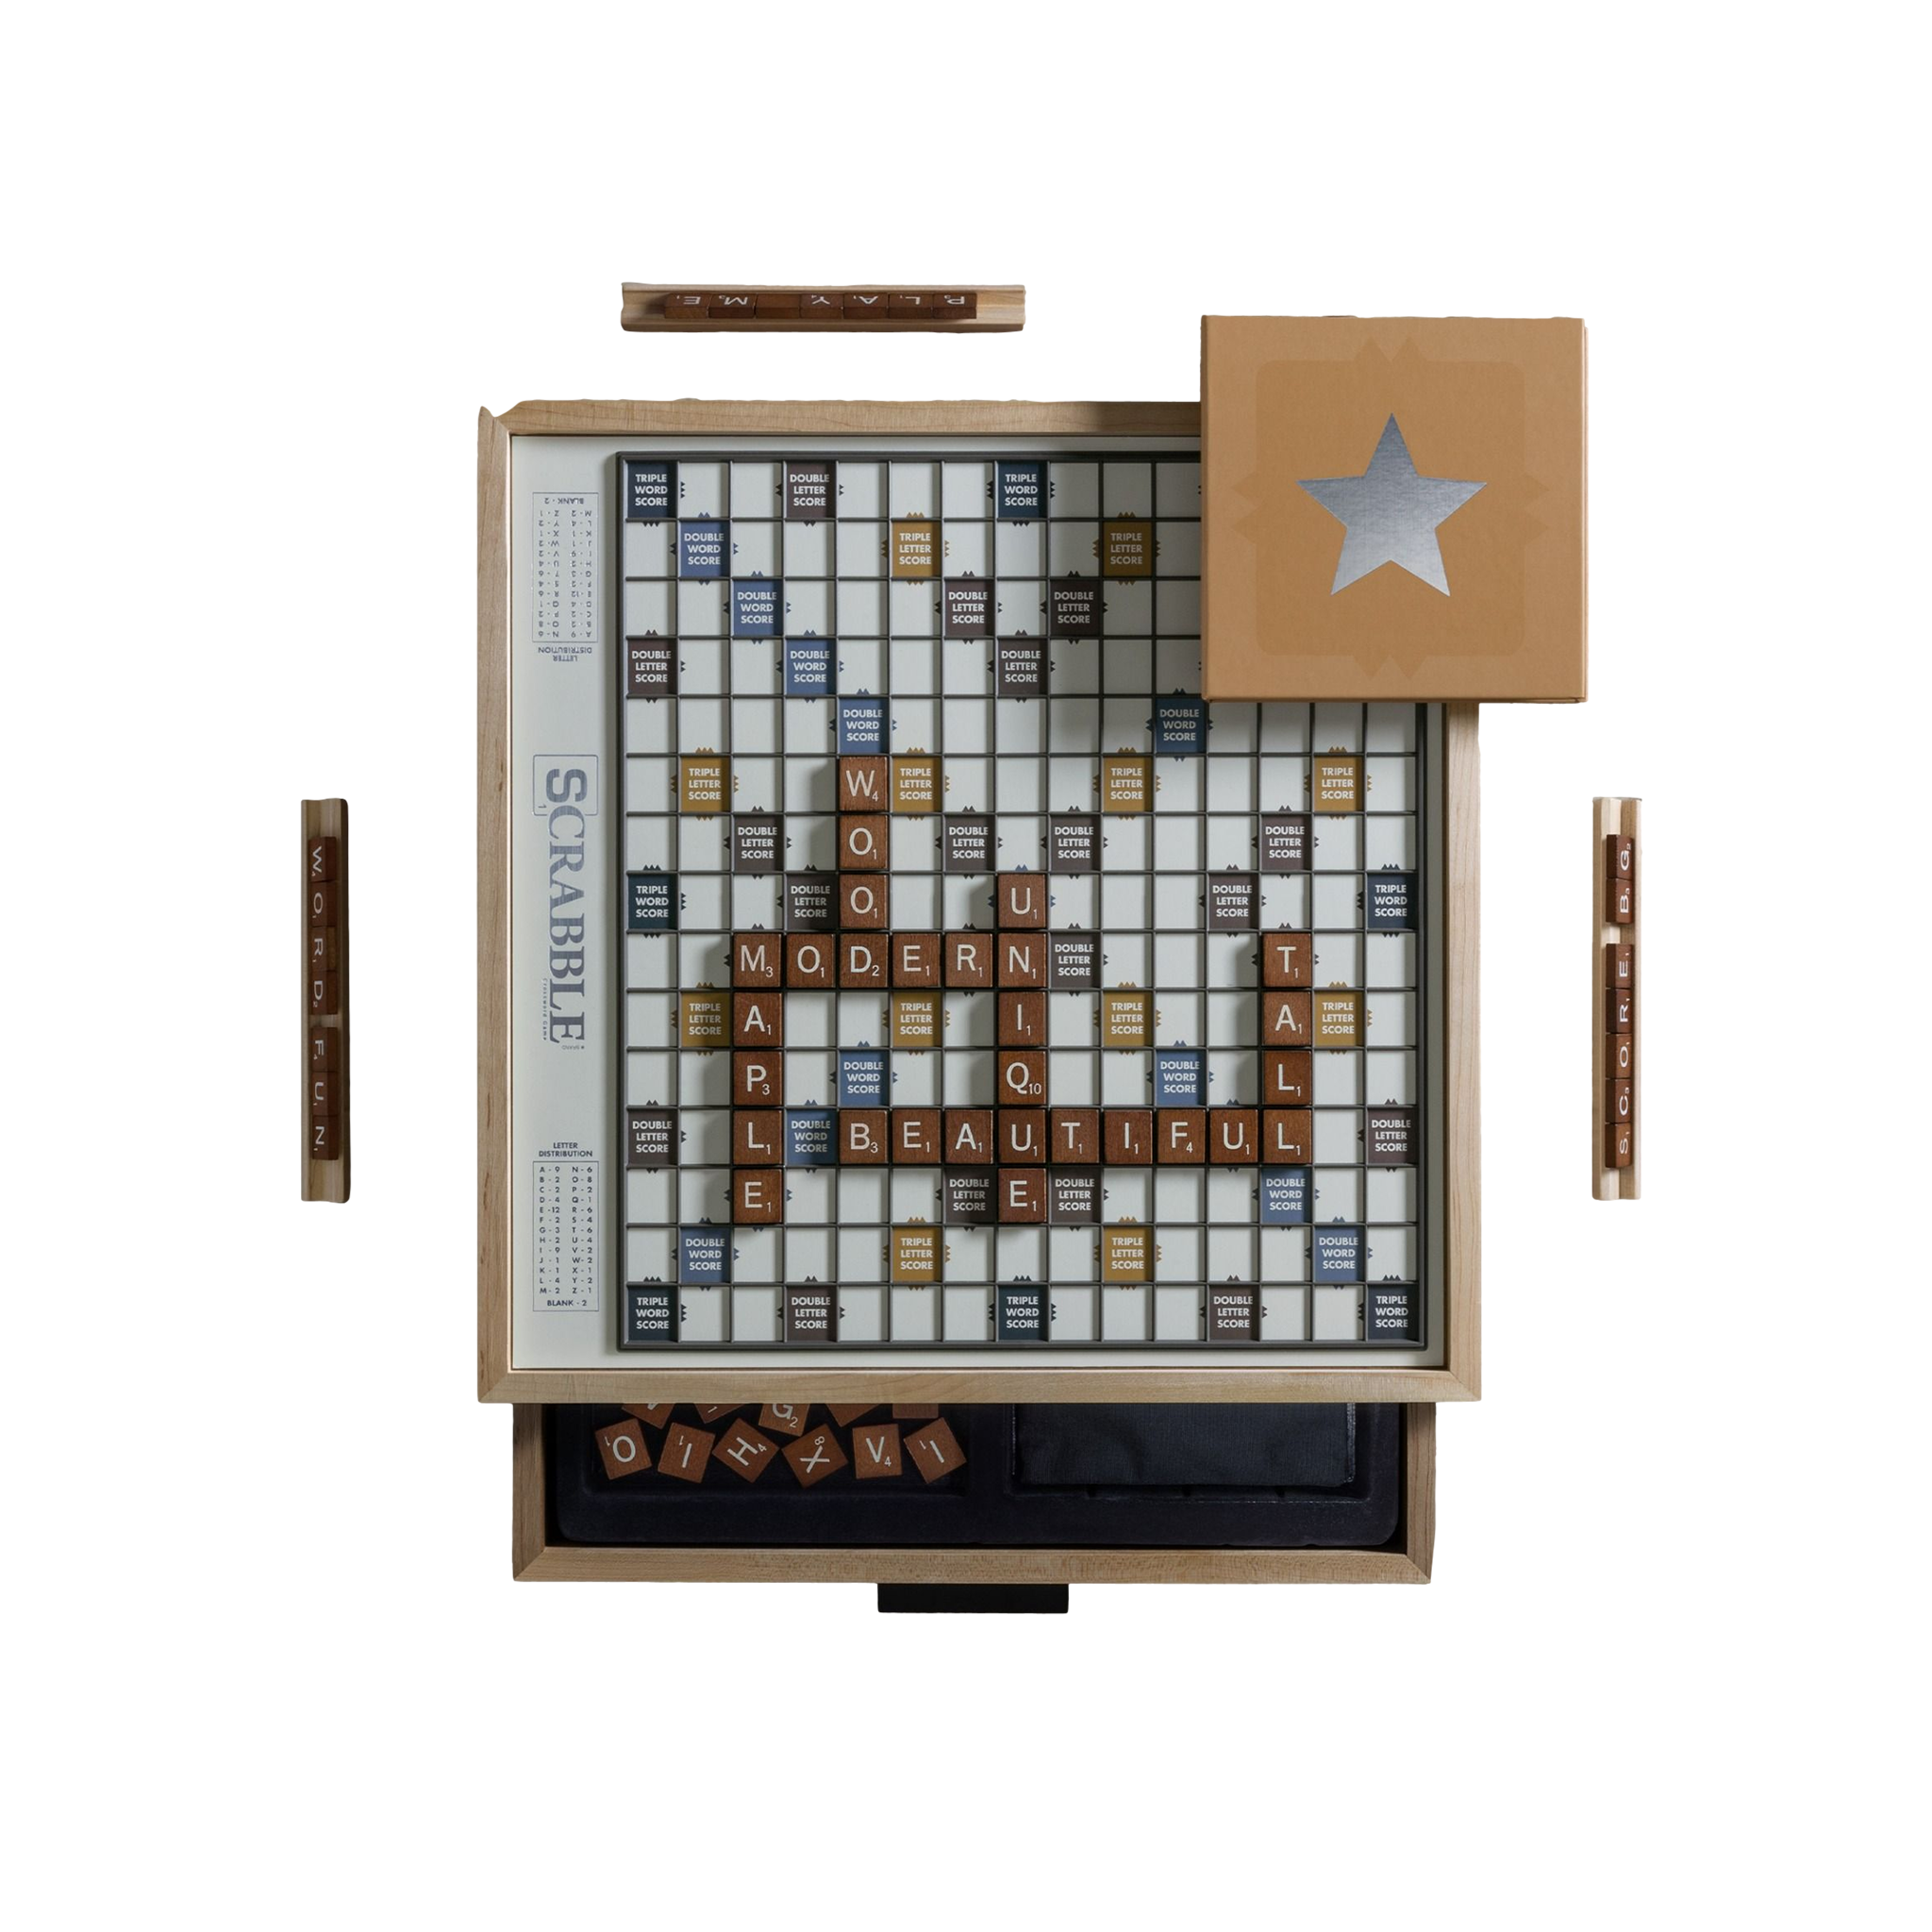 Scrabble Deluxe Premier Wood Edition Game